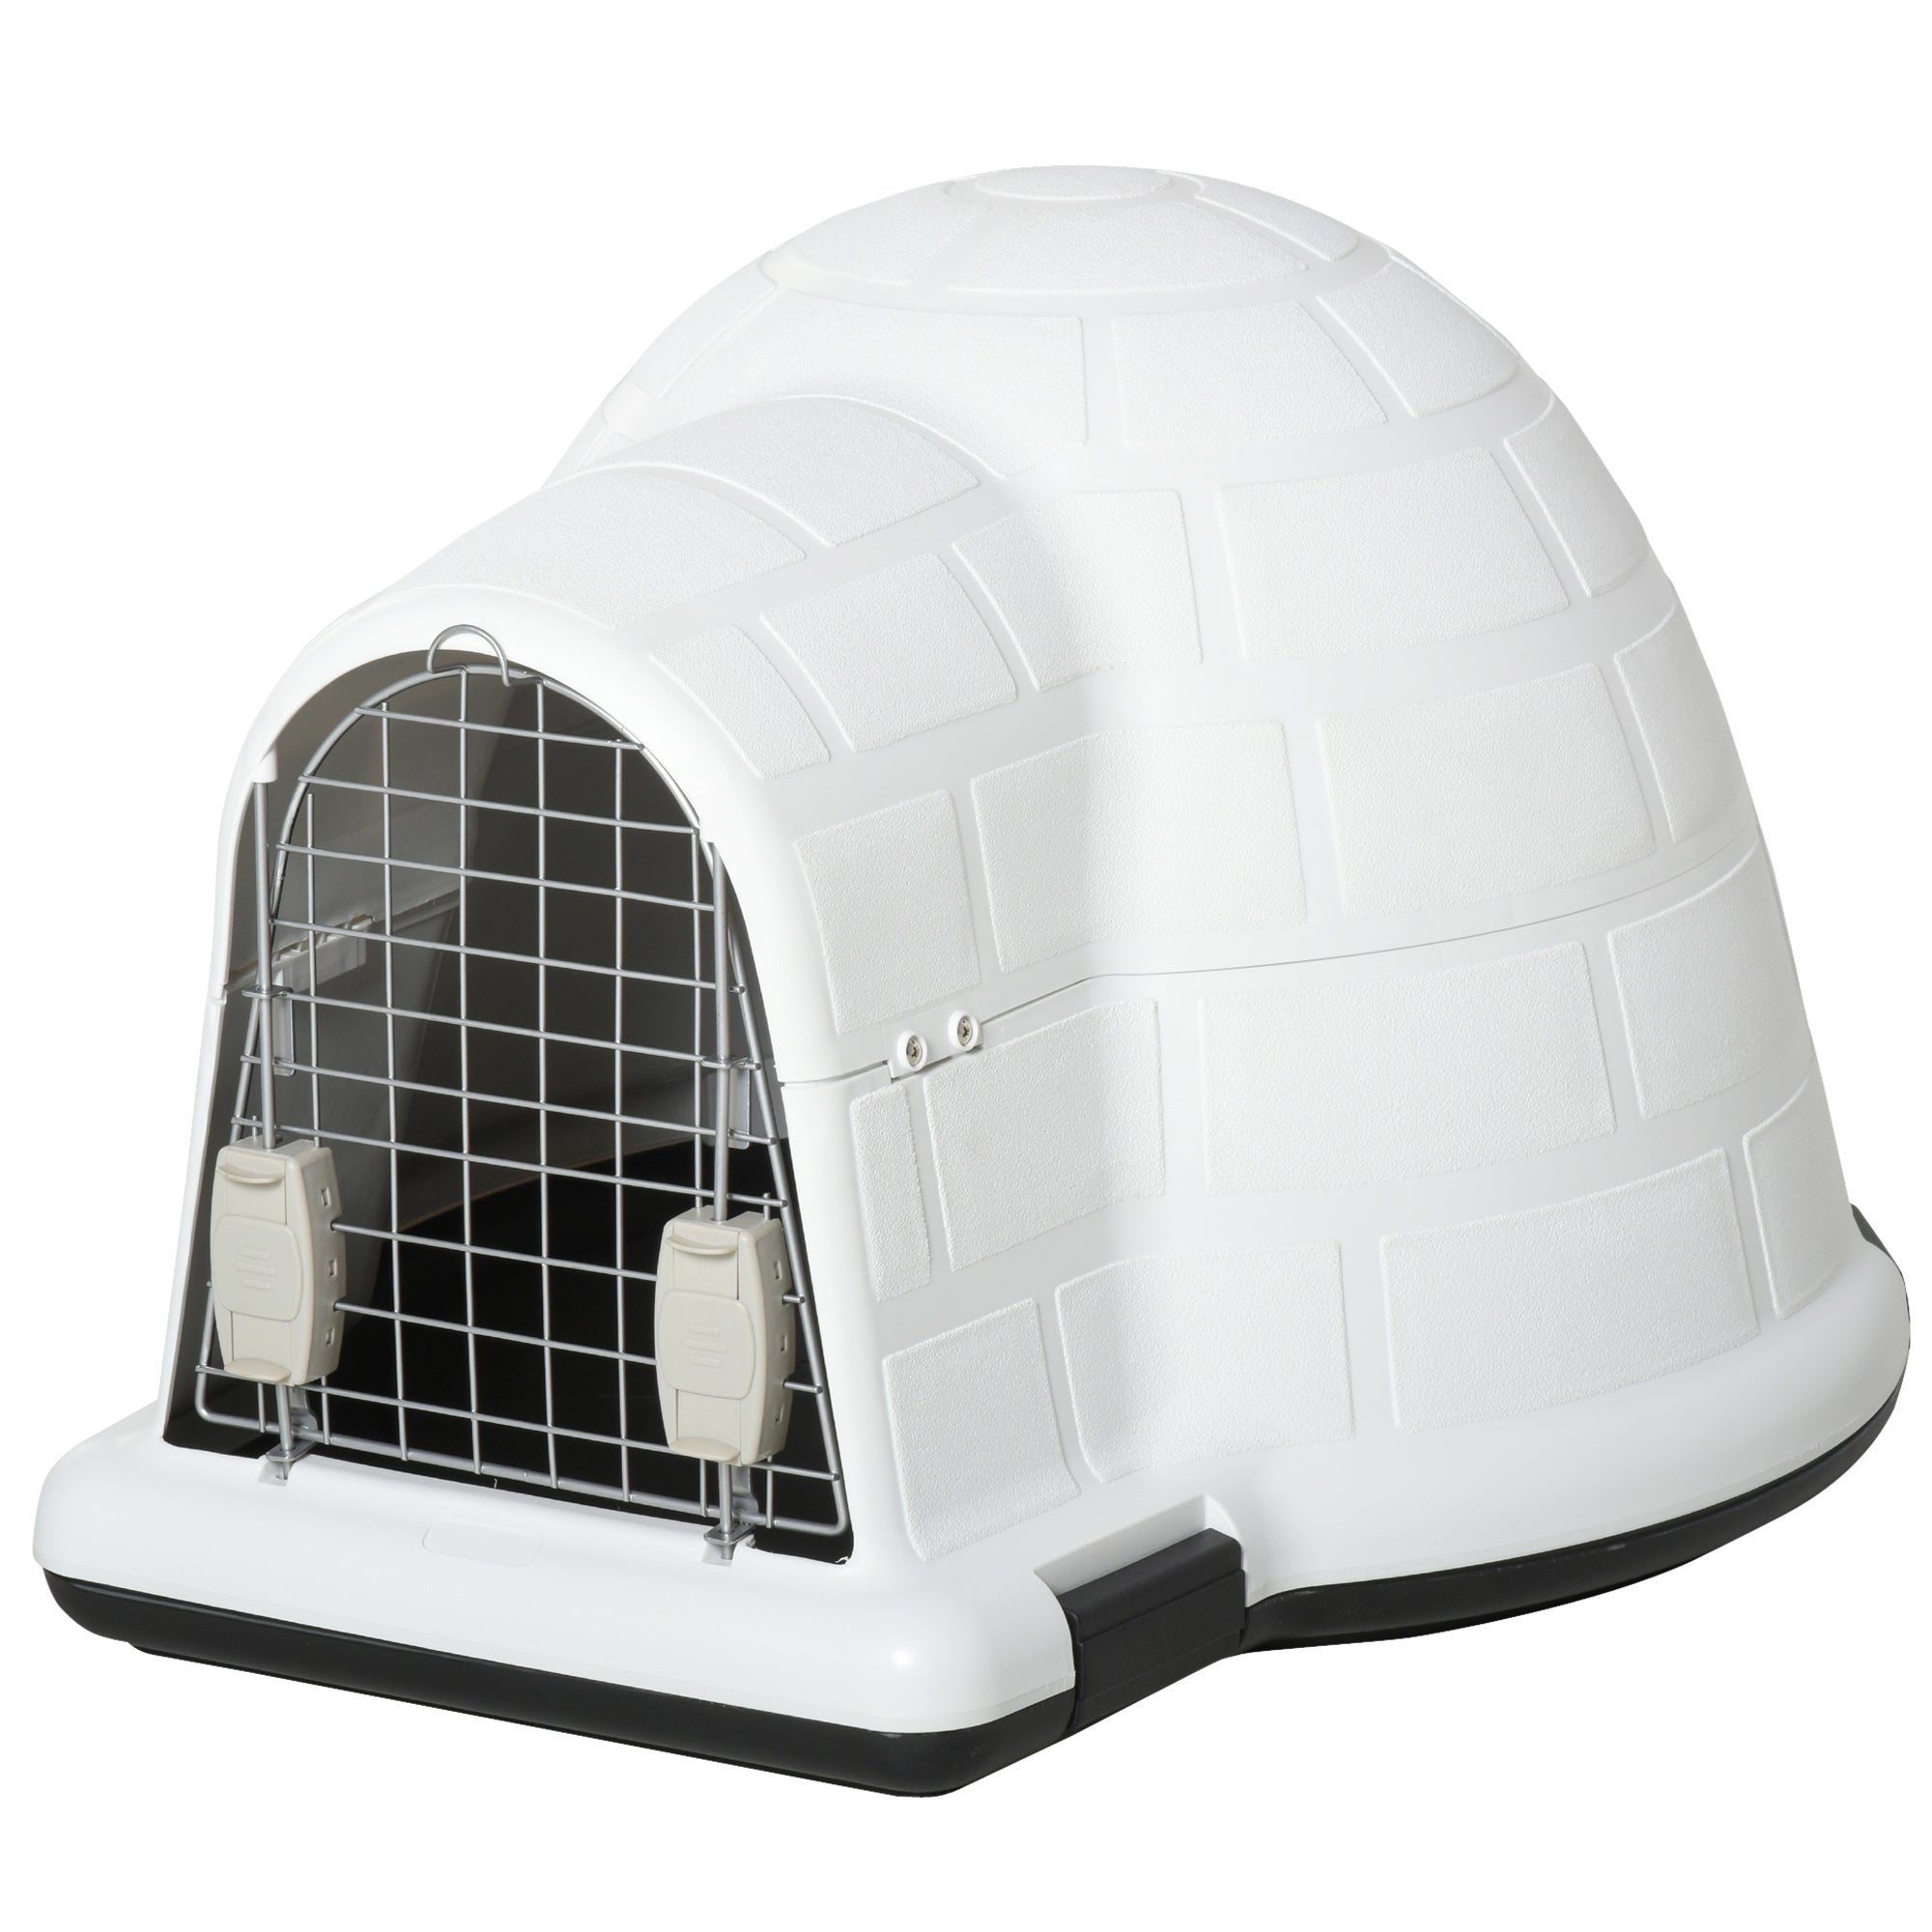 Plastic Igloo Dog House Puppy Kennel Pet Shelter w/ Windows for Small Sized Dogs